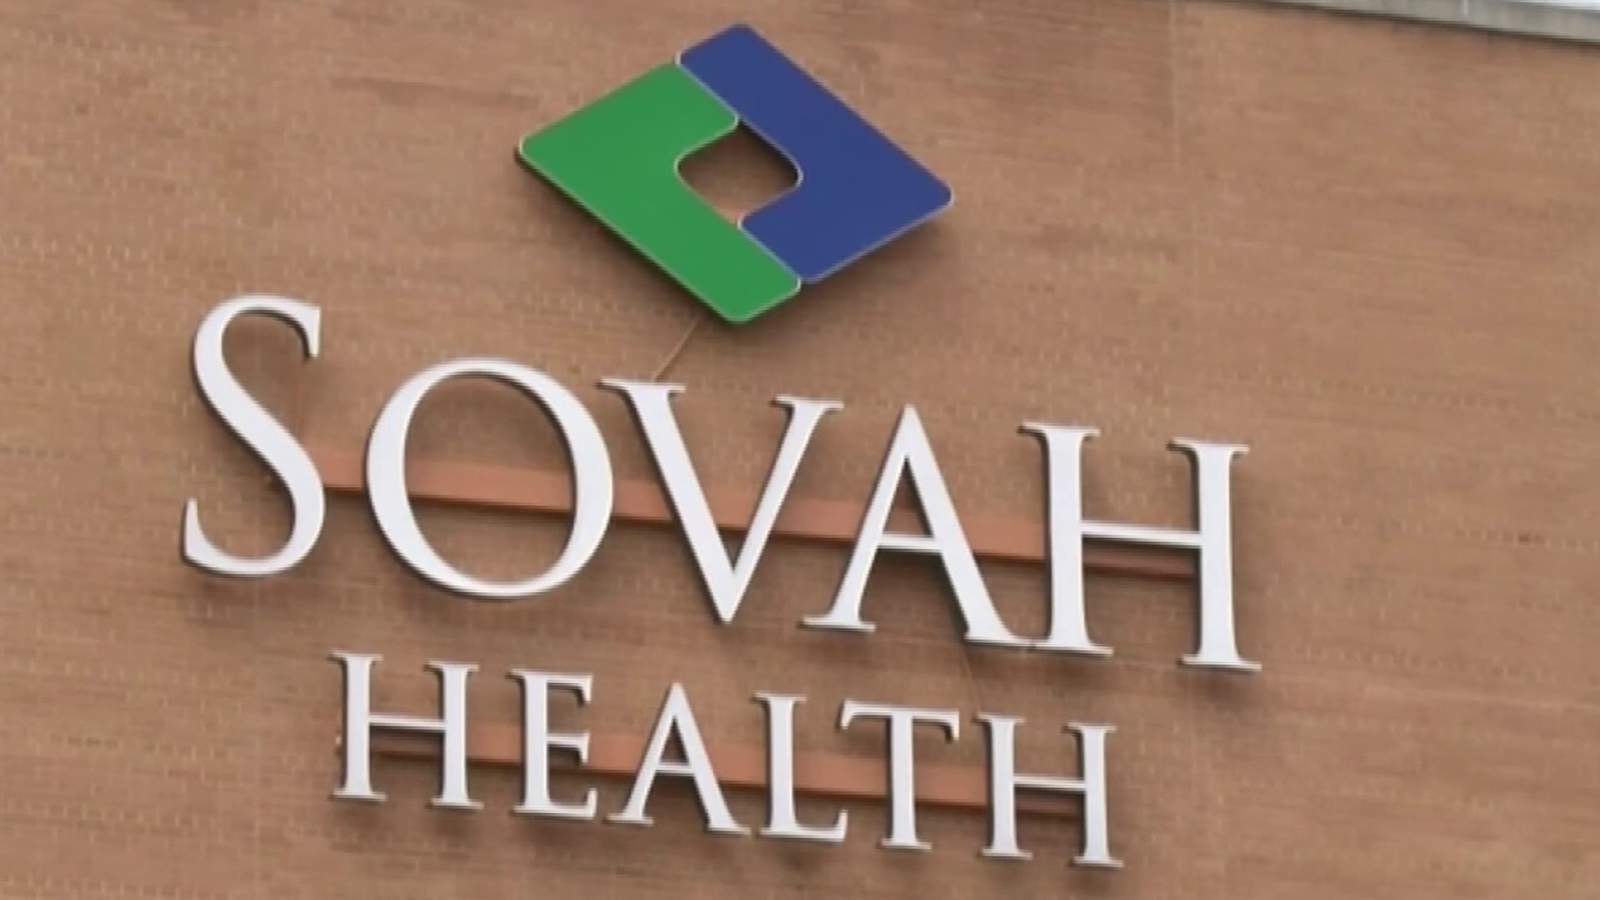 Sovah Health continues to treat COVID-19 patients with safety precautions in place